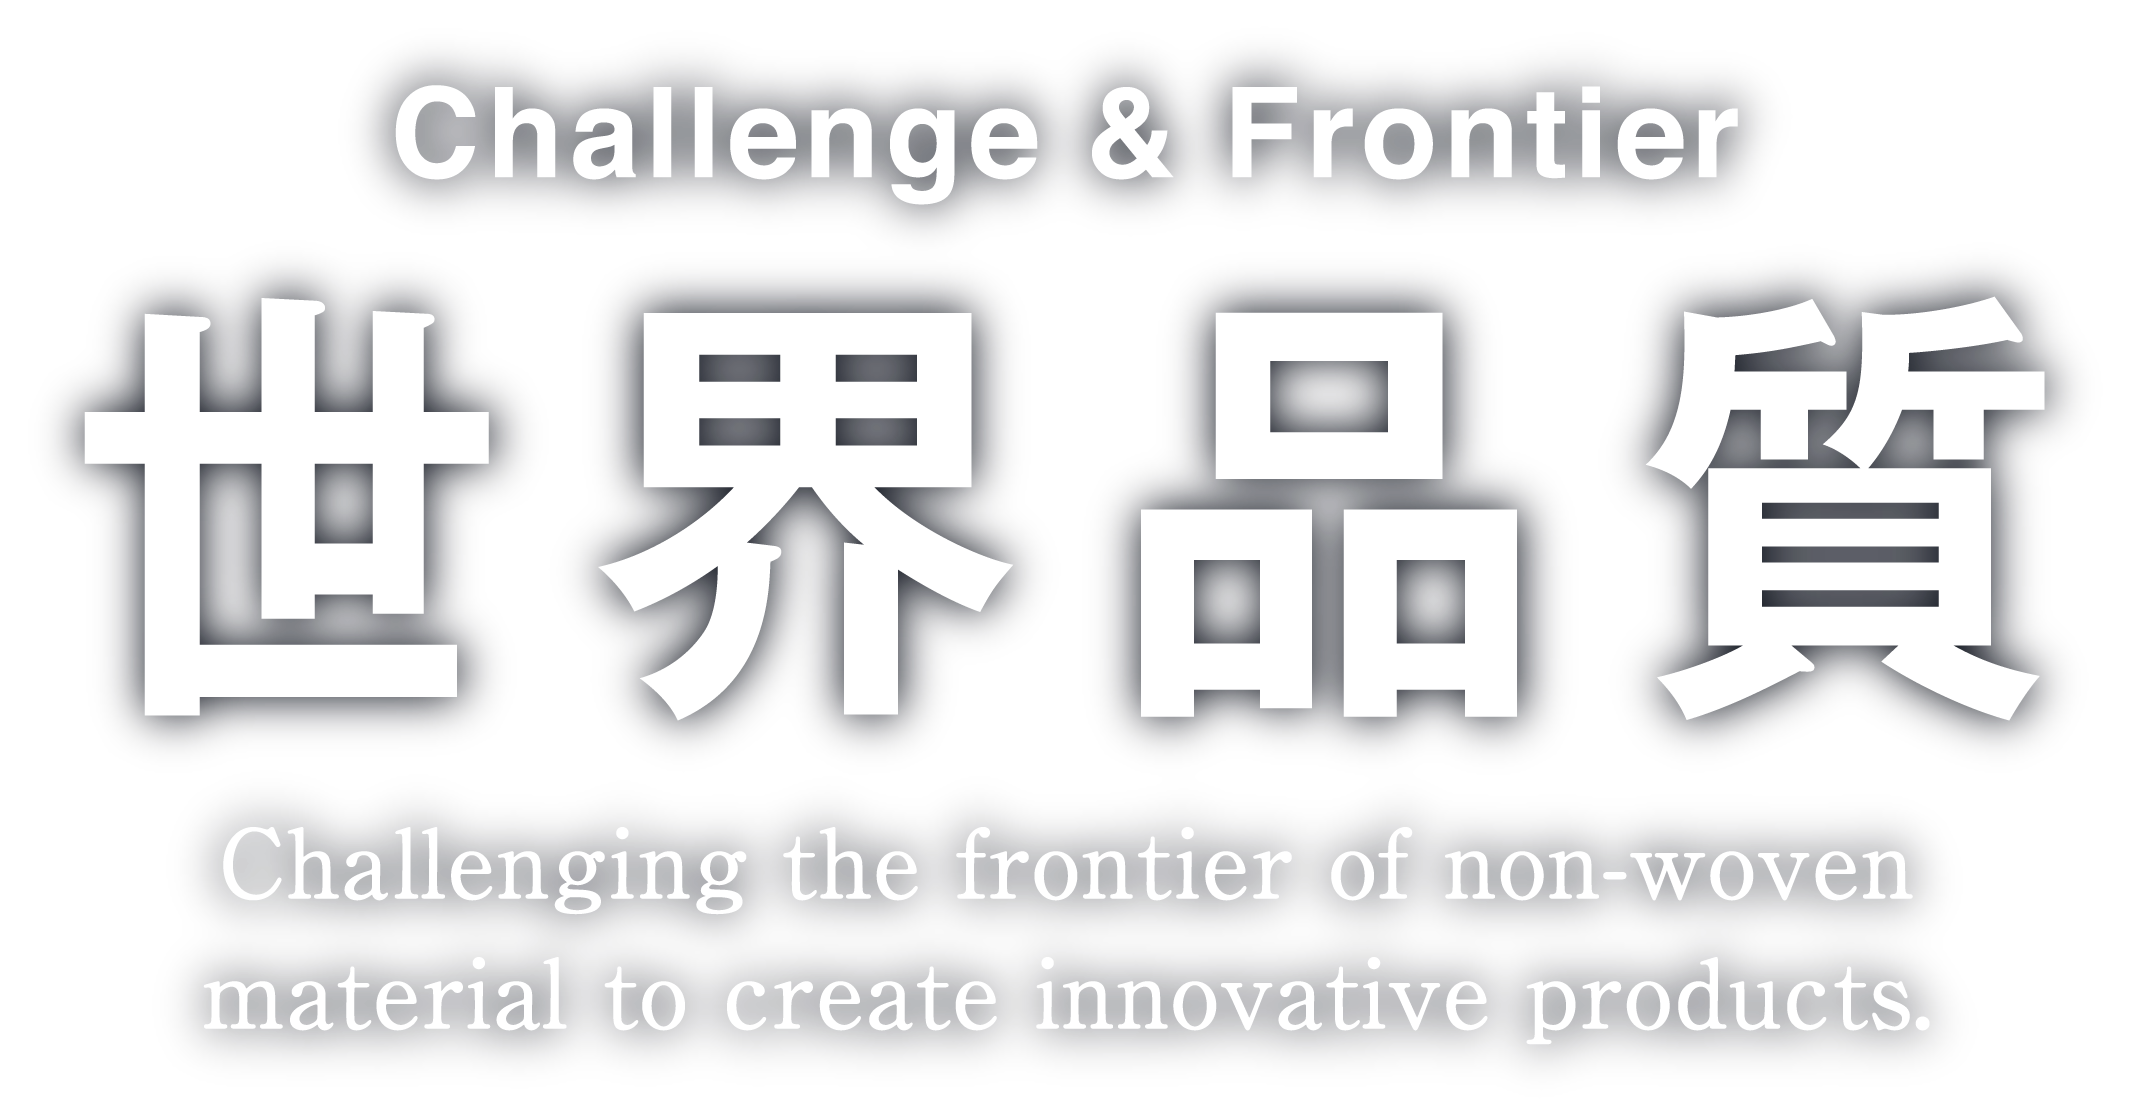 Challenge & Frontier 世界品質 Challenging the frontier of non-woven material to create innovative products.